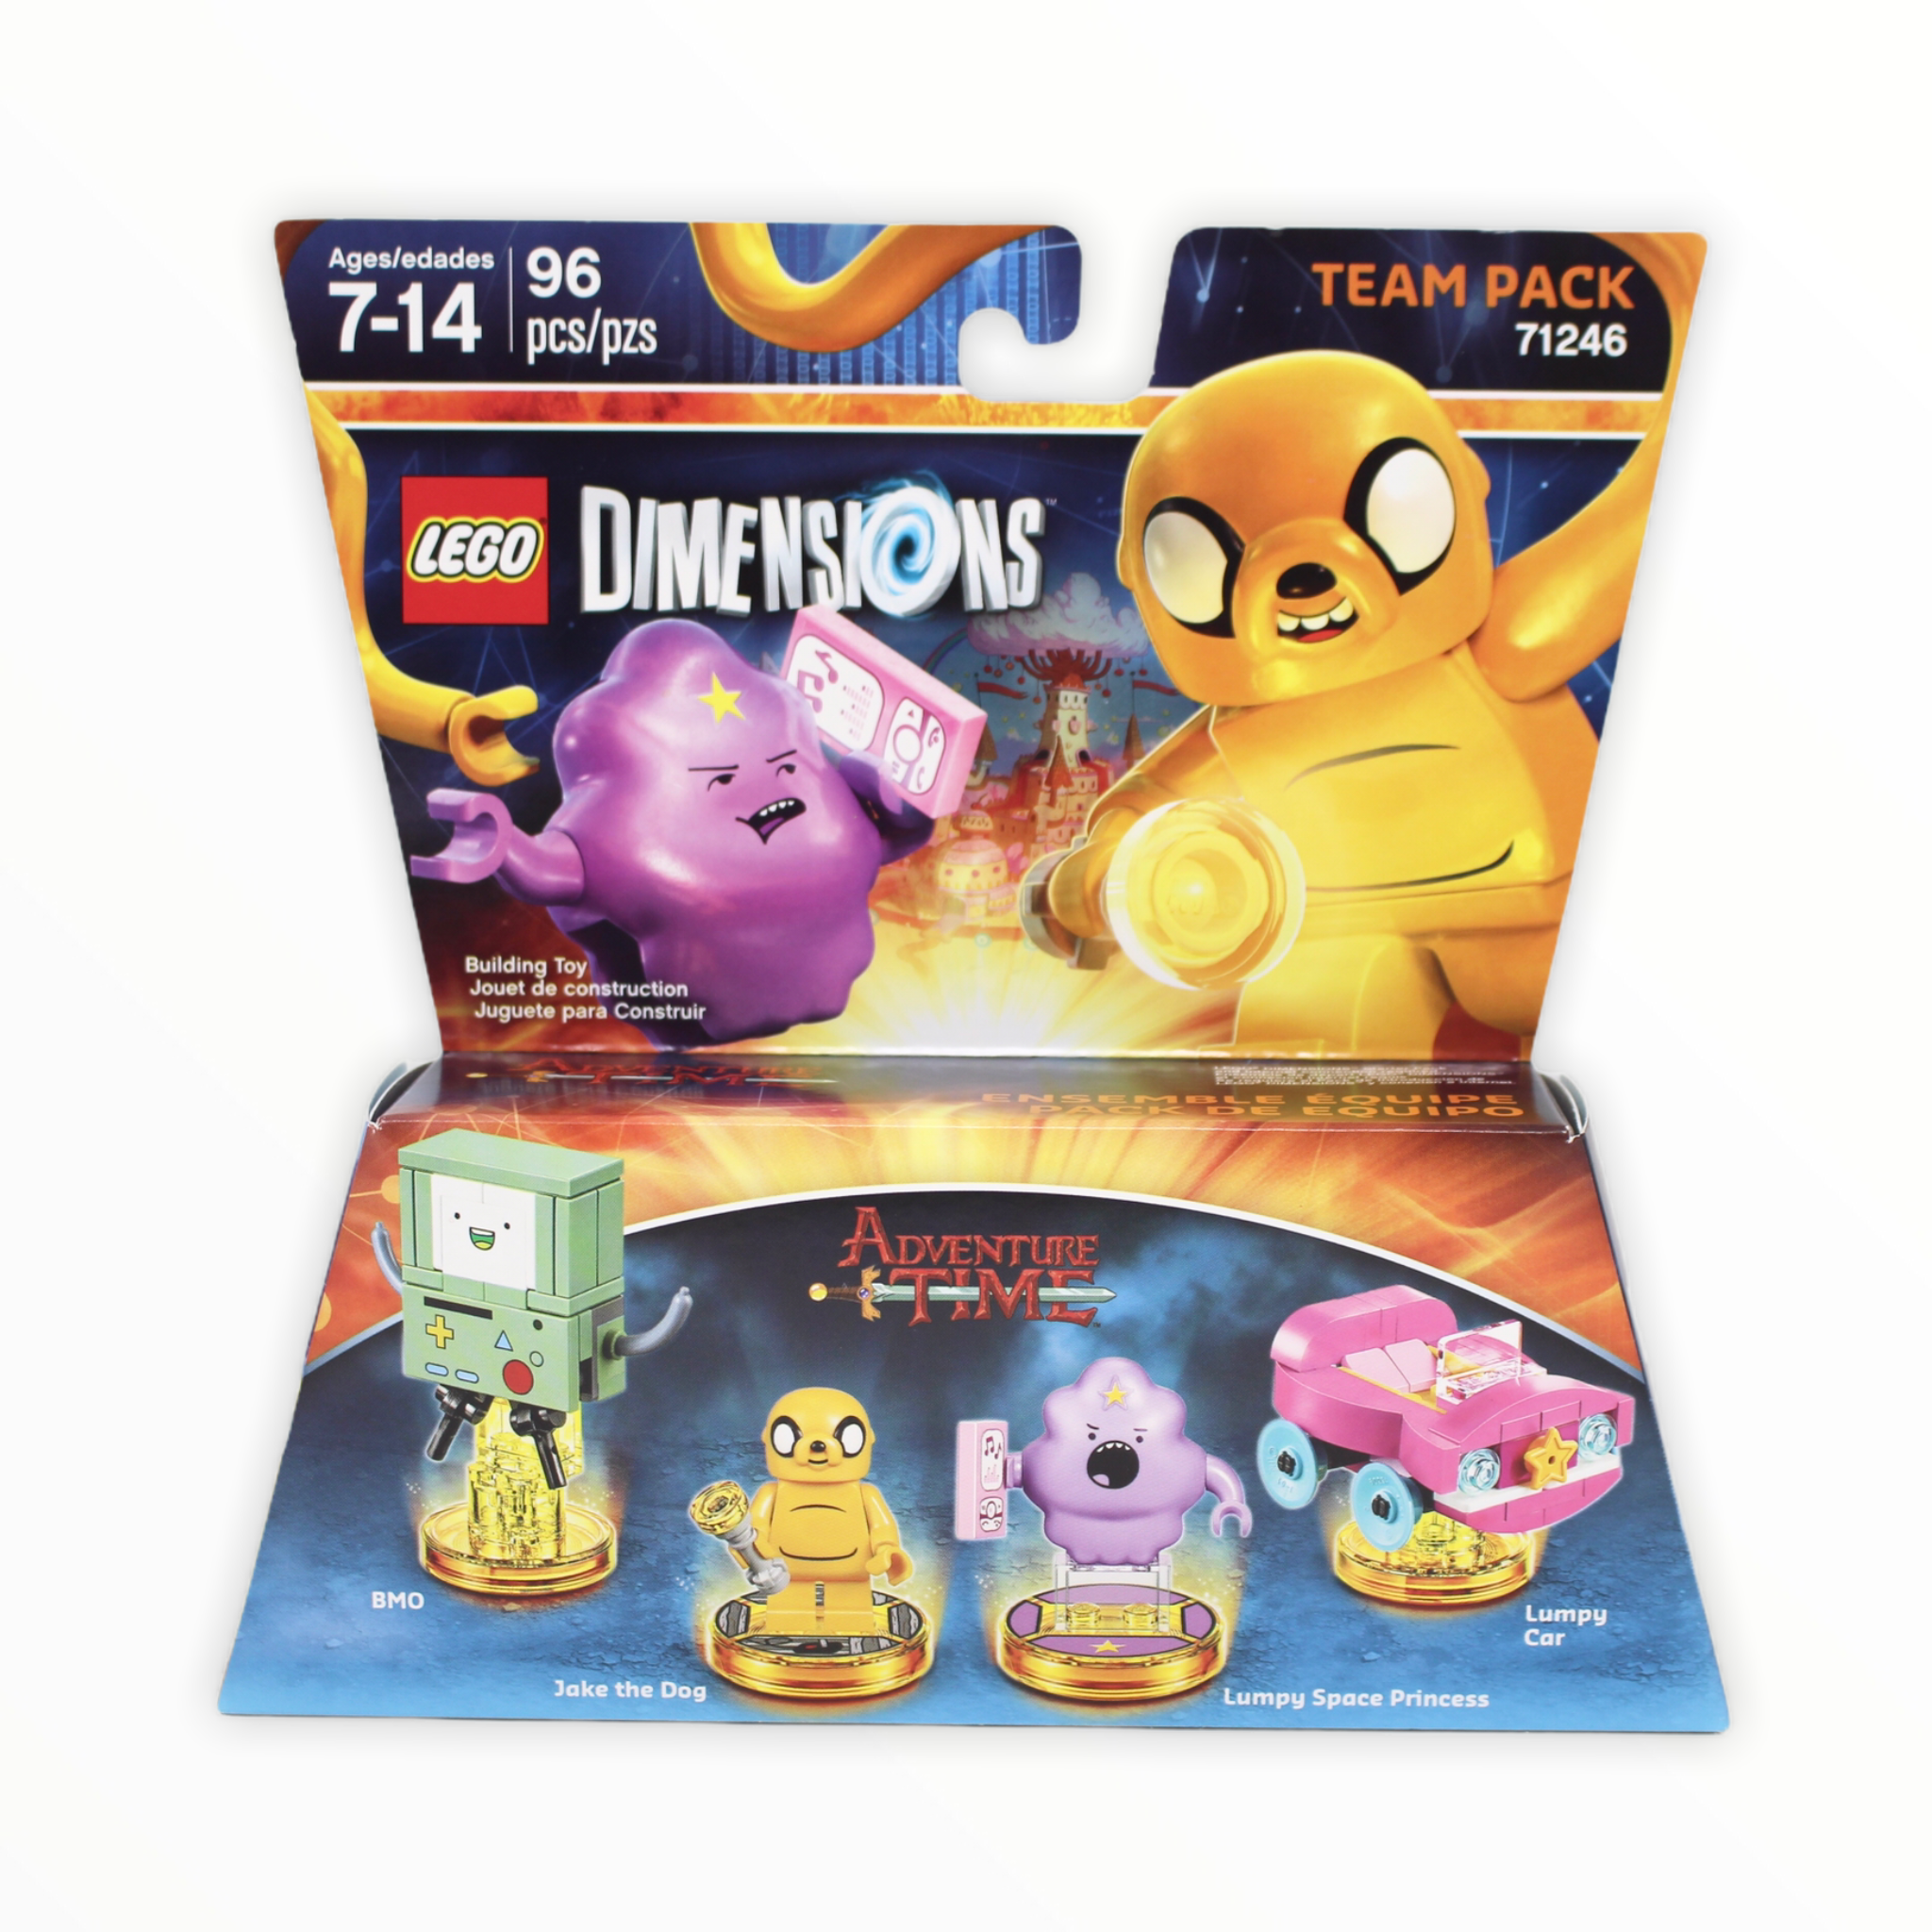 Retired Set 71246 Dimensions Team Pack - Adventure Time